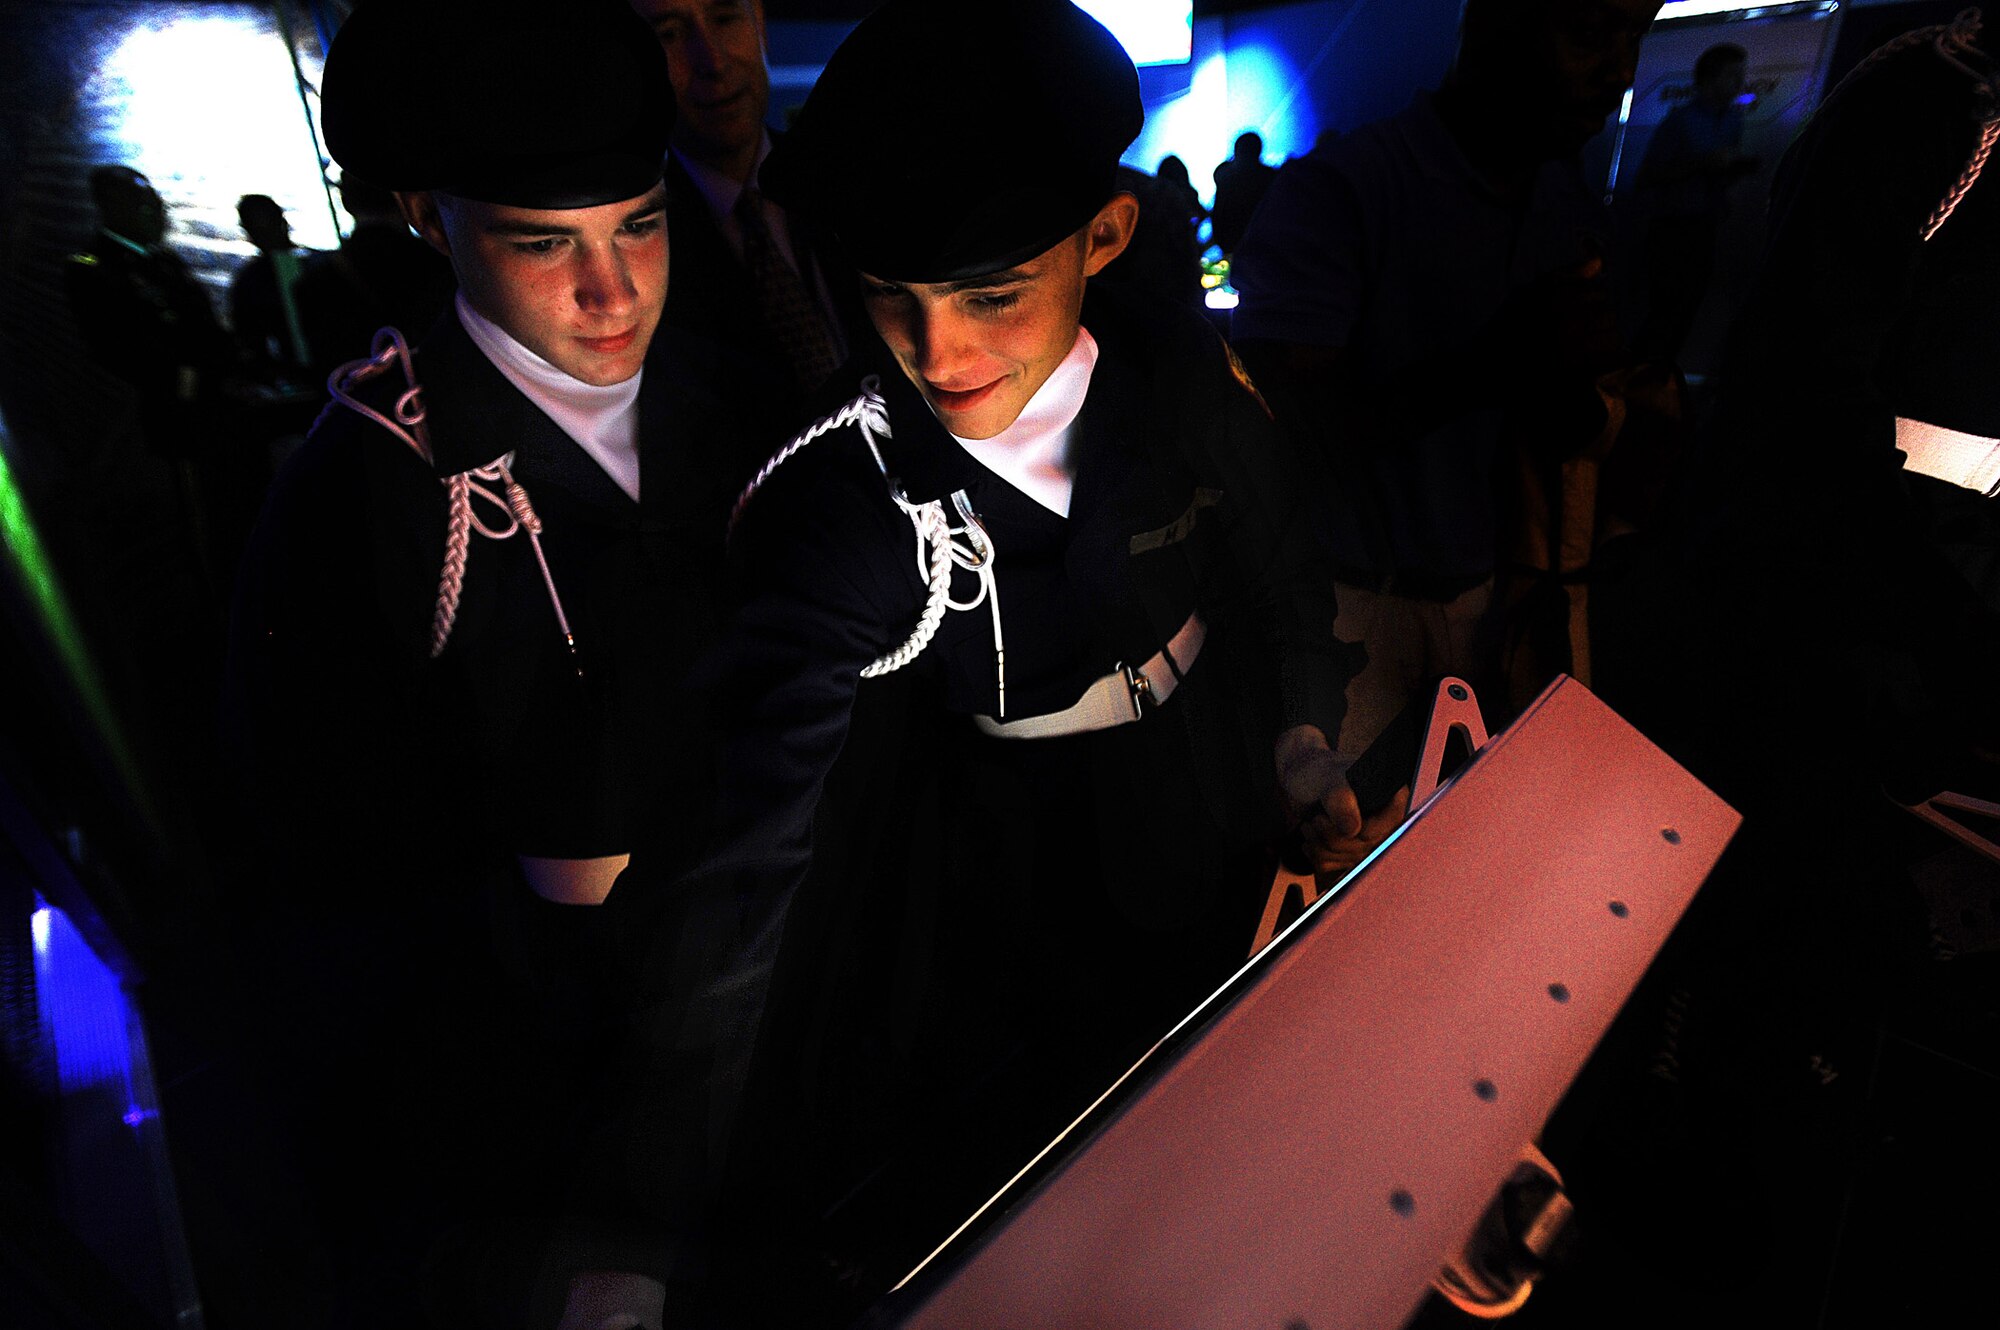 Cadets from the Maryland Freestate ChalleNGe Academy participate in one of the interactive components of the National Guard's mobile Energy Lab during the unveiling Sept. 30, 2010 at the Ronald Reagan Building and International Trade Center in Washington, D.C. The Energy Lab, part of the guard's Mobile Learning Center program, is designed to promote interest in the sciences and technology fields through interactive, game-based scenarios. The lab is scheduled to travel to throughout 10 states as a way to encourage and develop interest among high school juniors and seniors in the sciences.